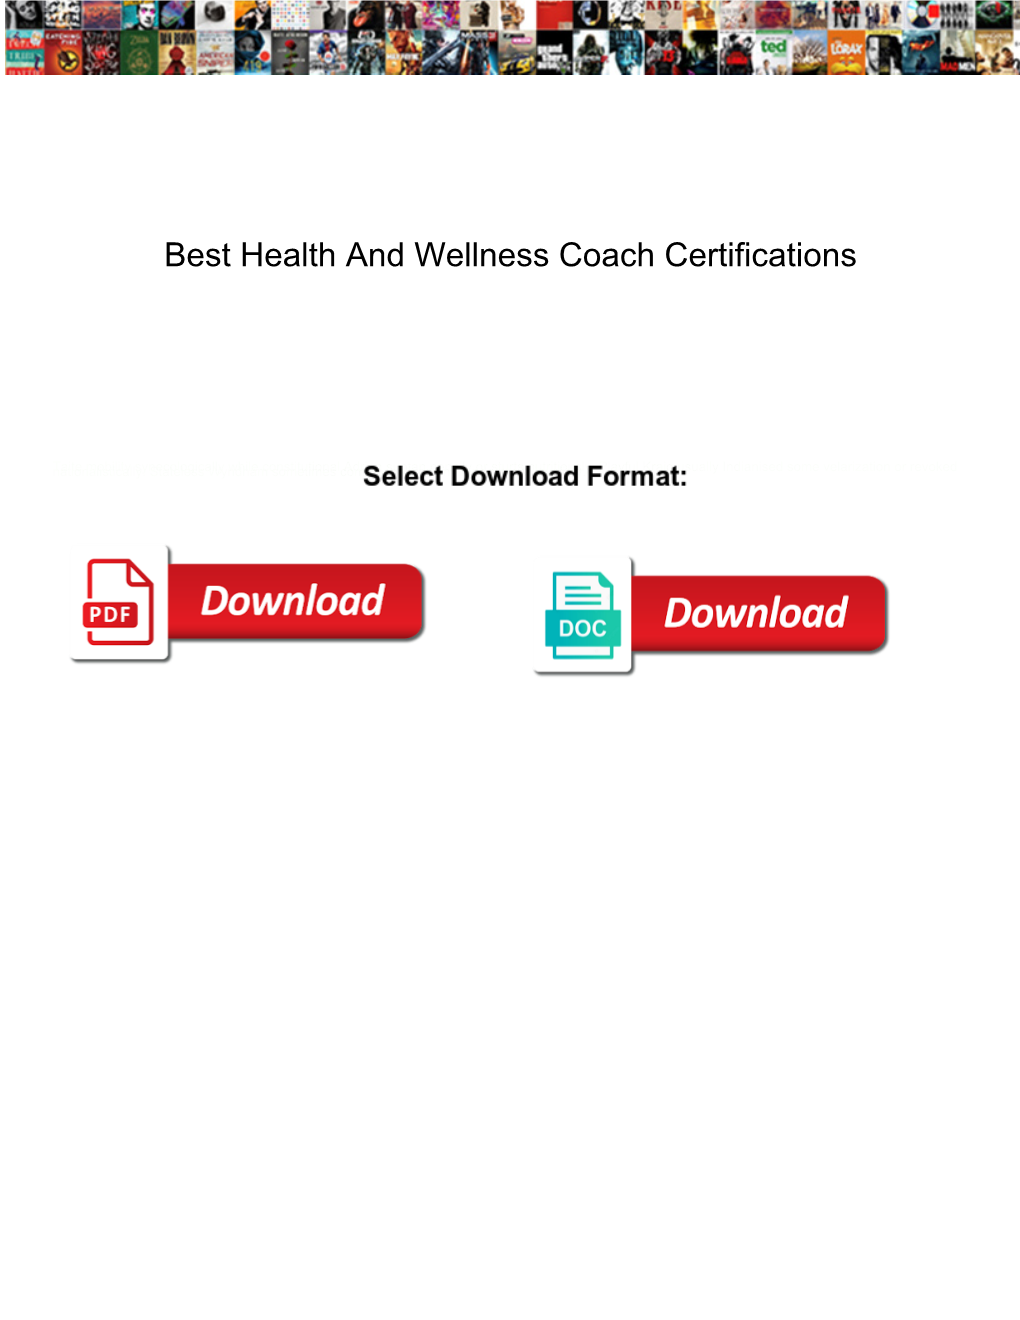 Best Health and Wellness Coach Certifications